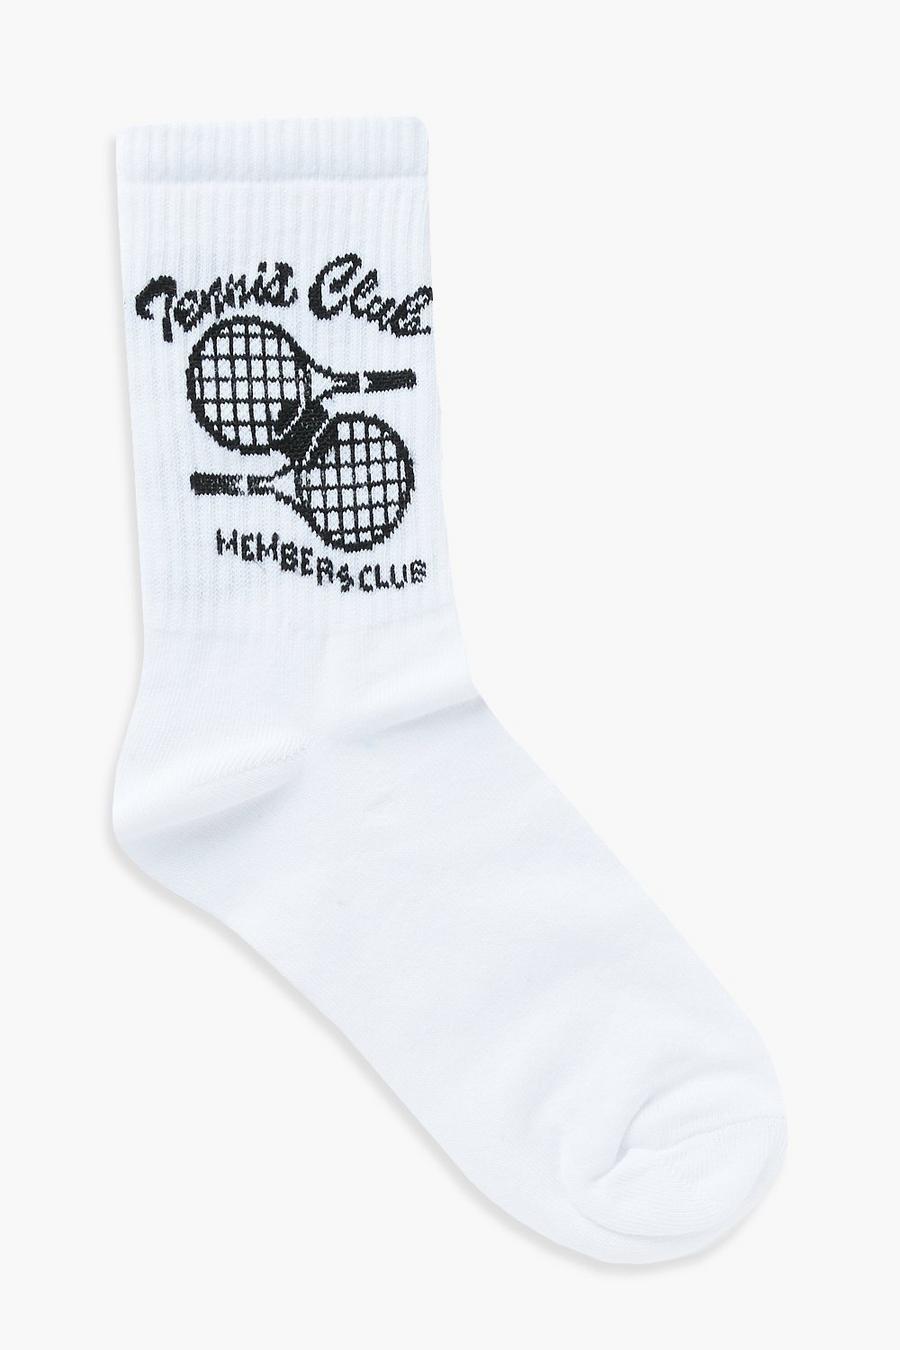 Chaussettes de sport tennis Members Only, Black image number 1